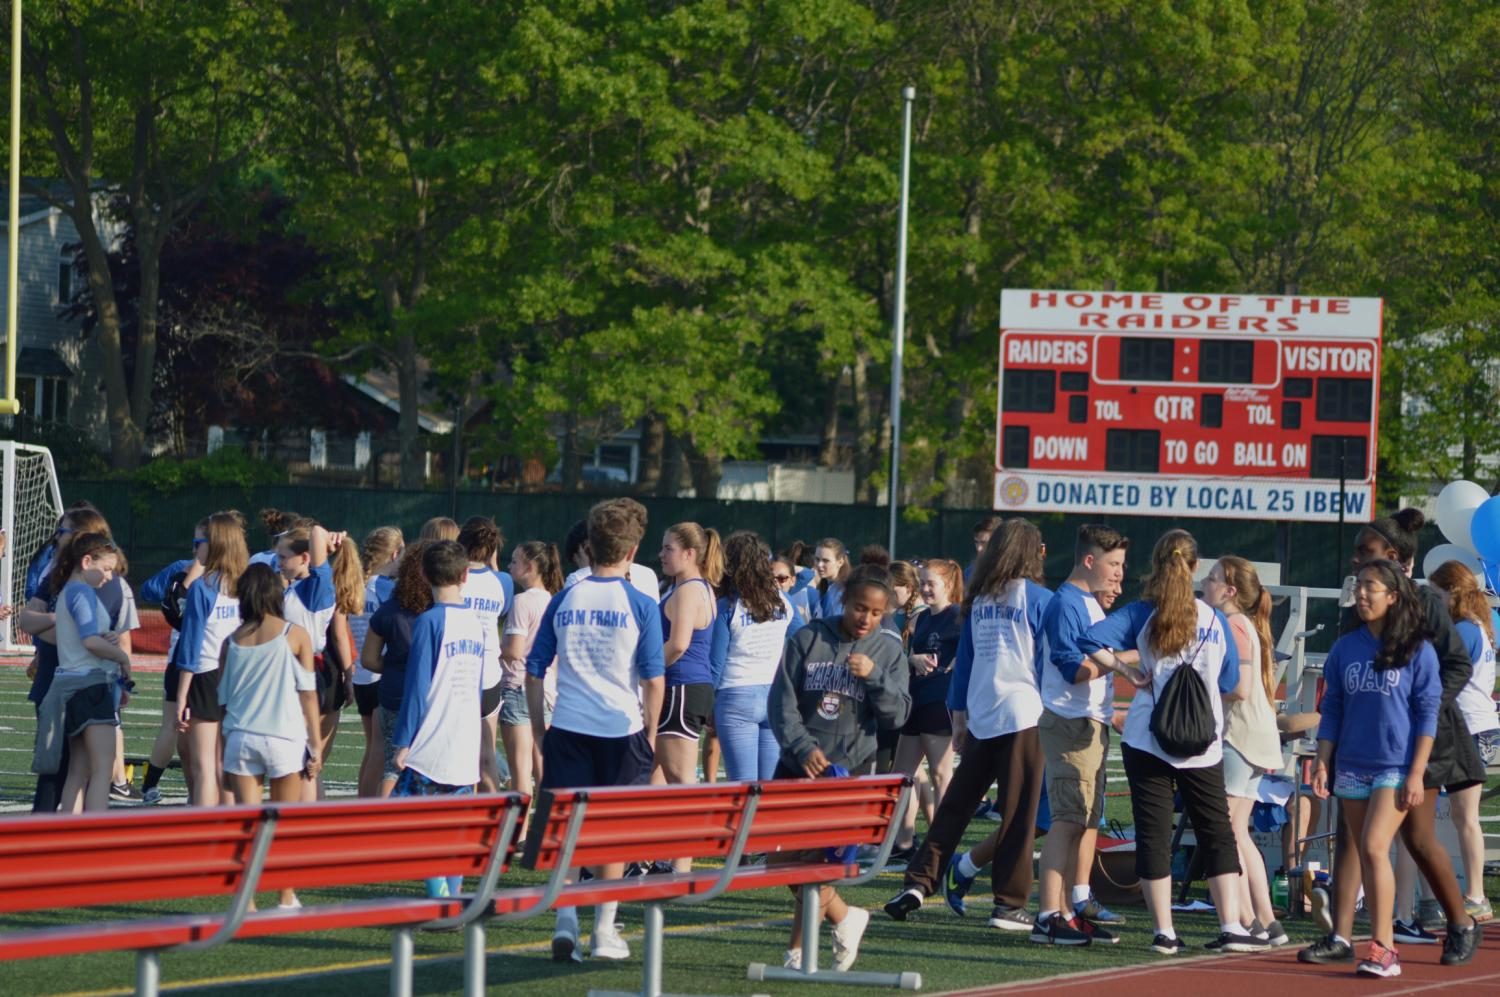 Students and community members alike gathered on our HS track & field to support ALS: Ride for Life.